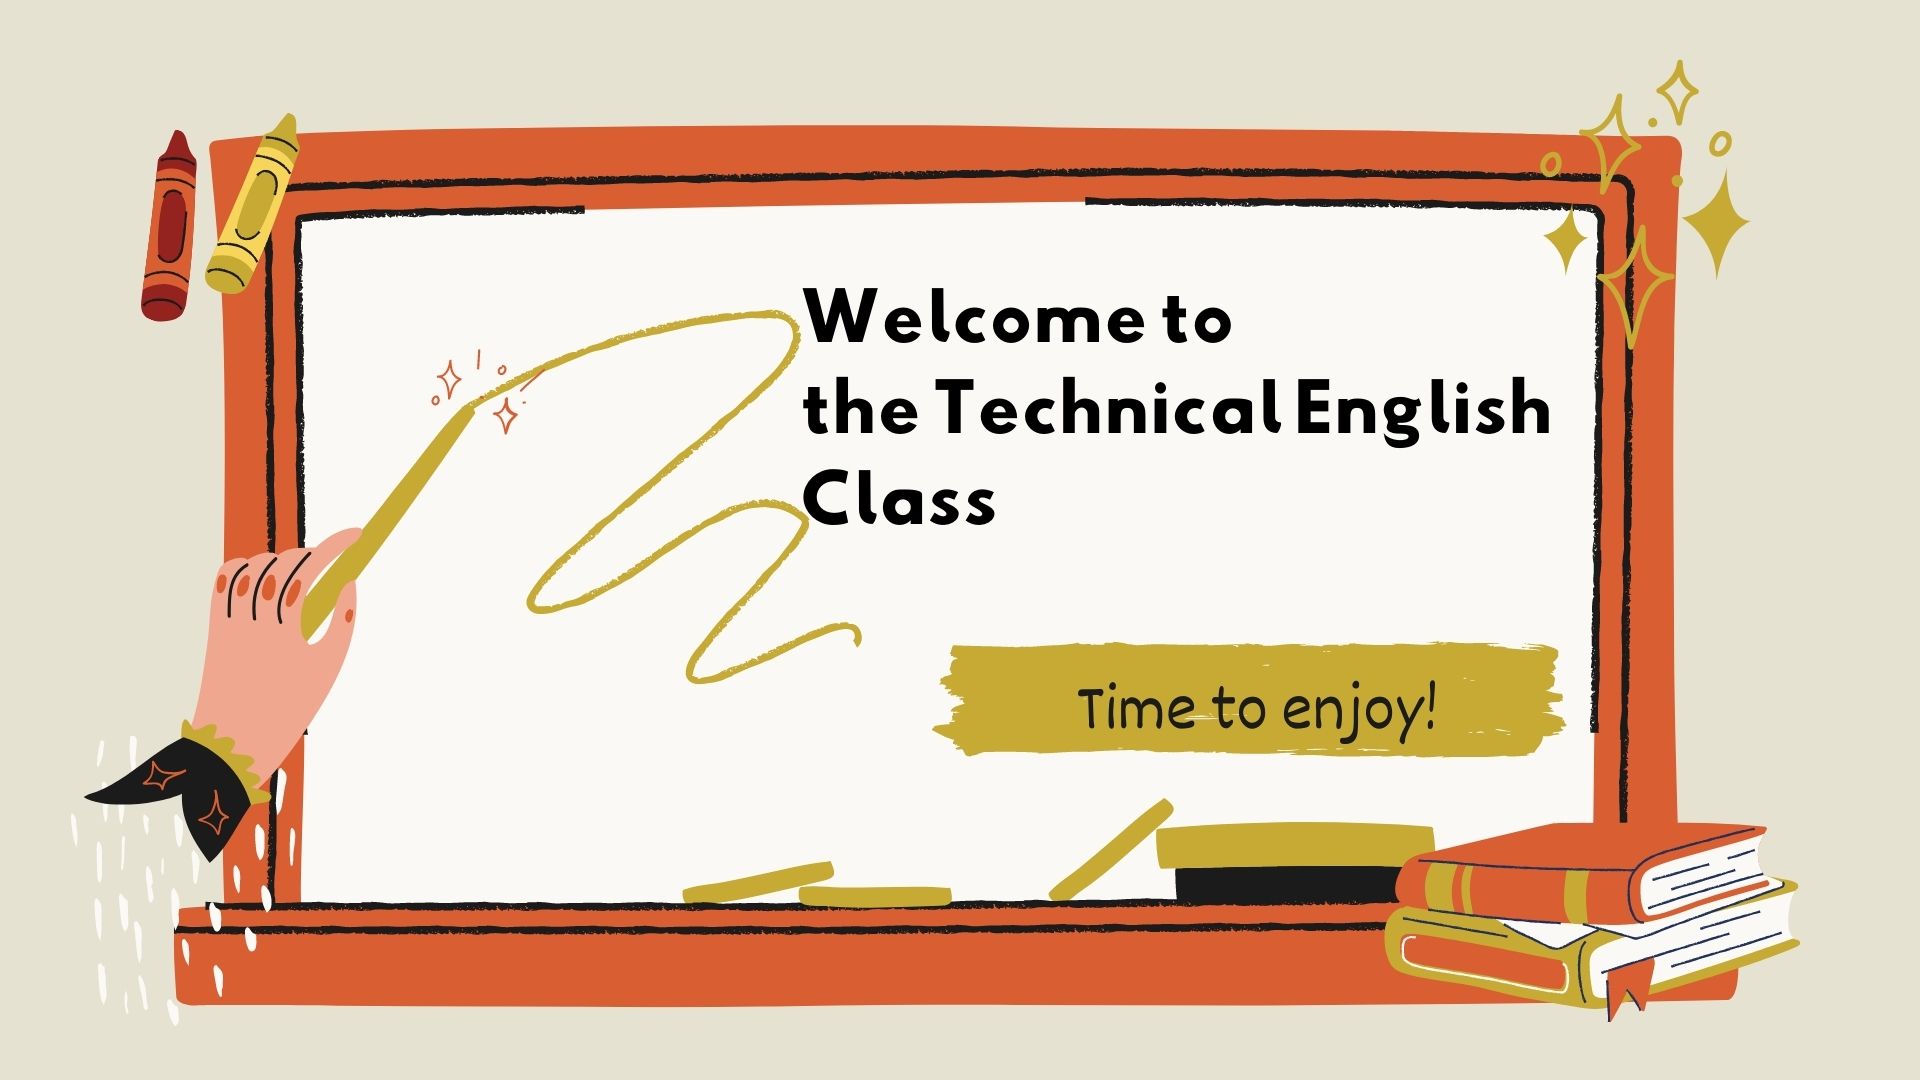 Welcome%20to%20the%20Technical%20English%20Class.jpg